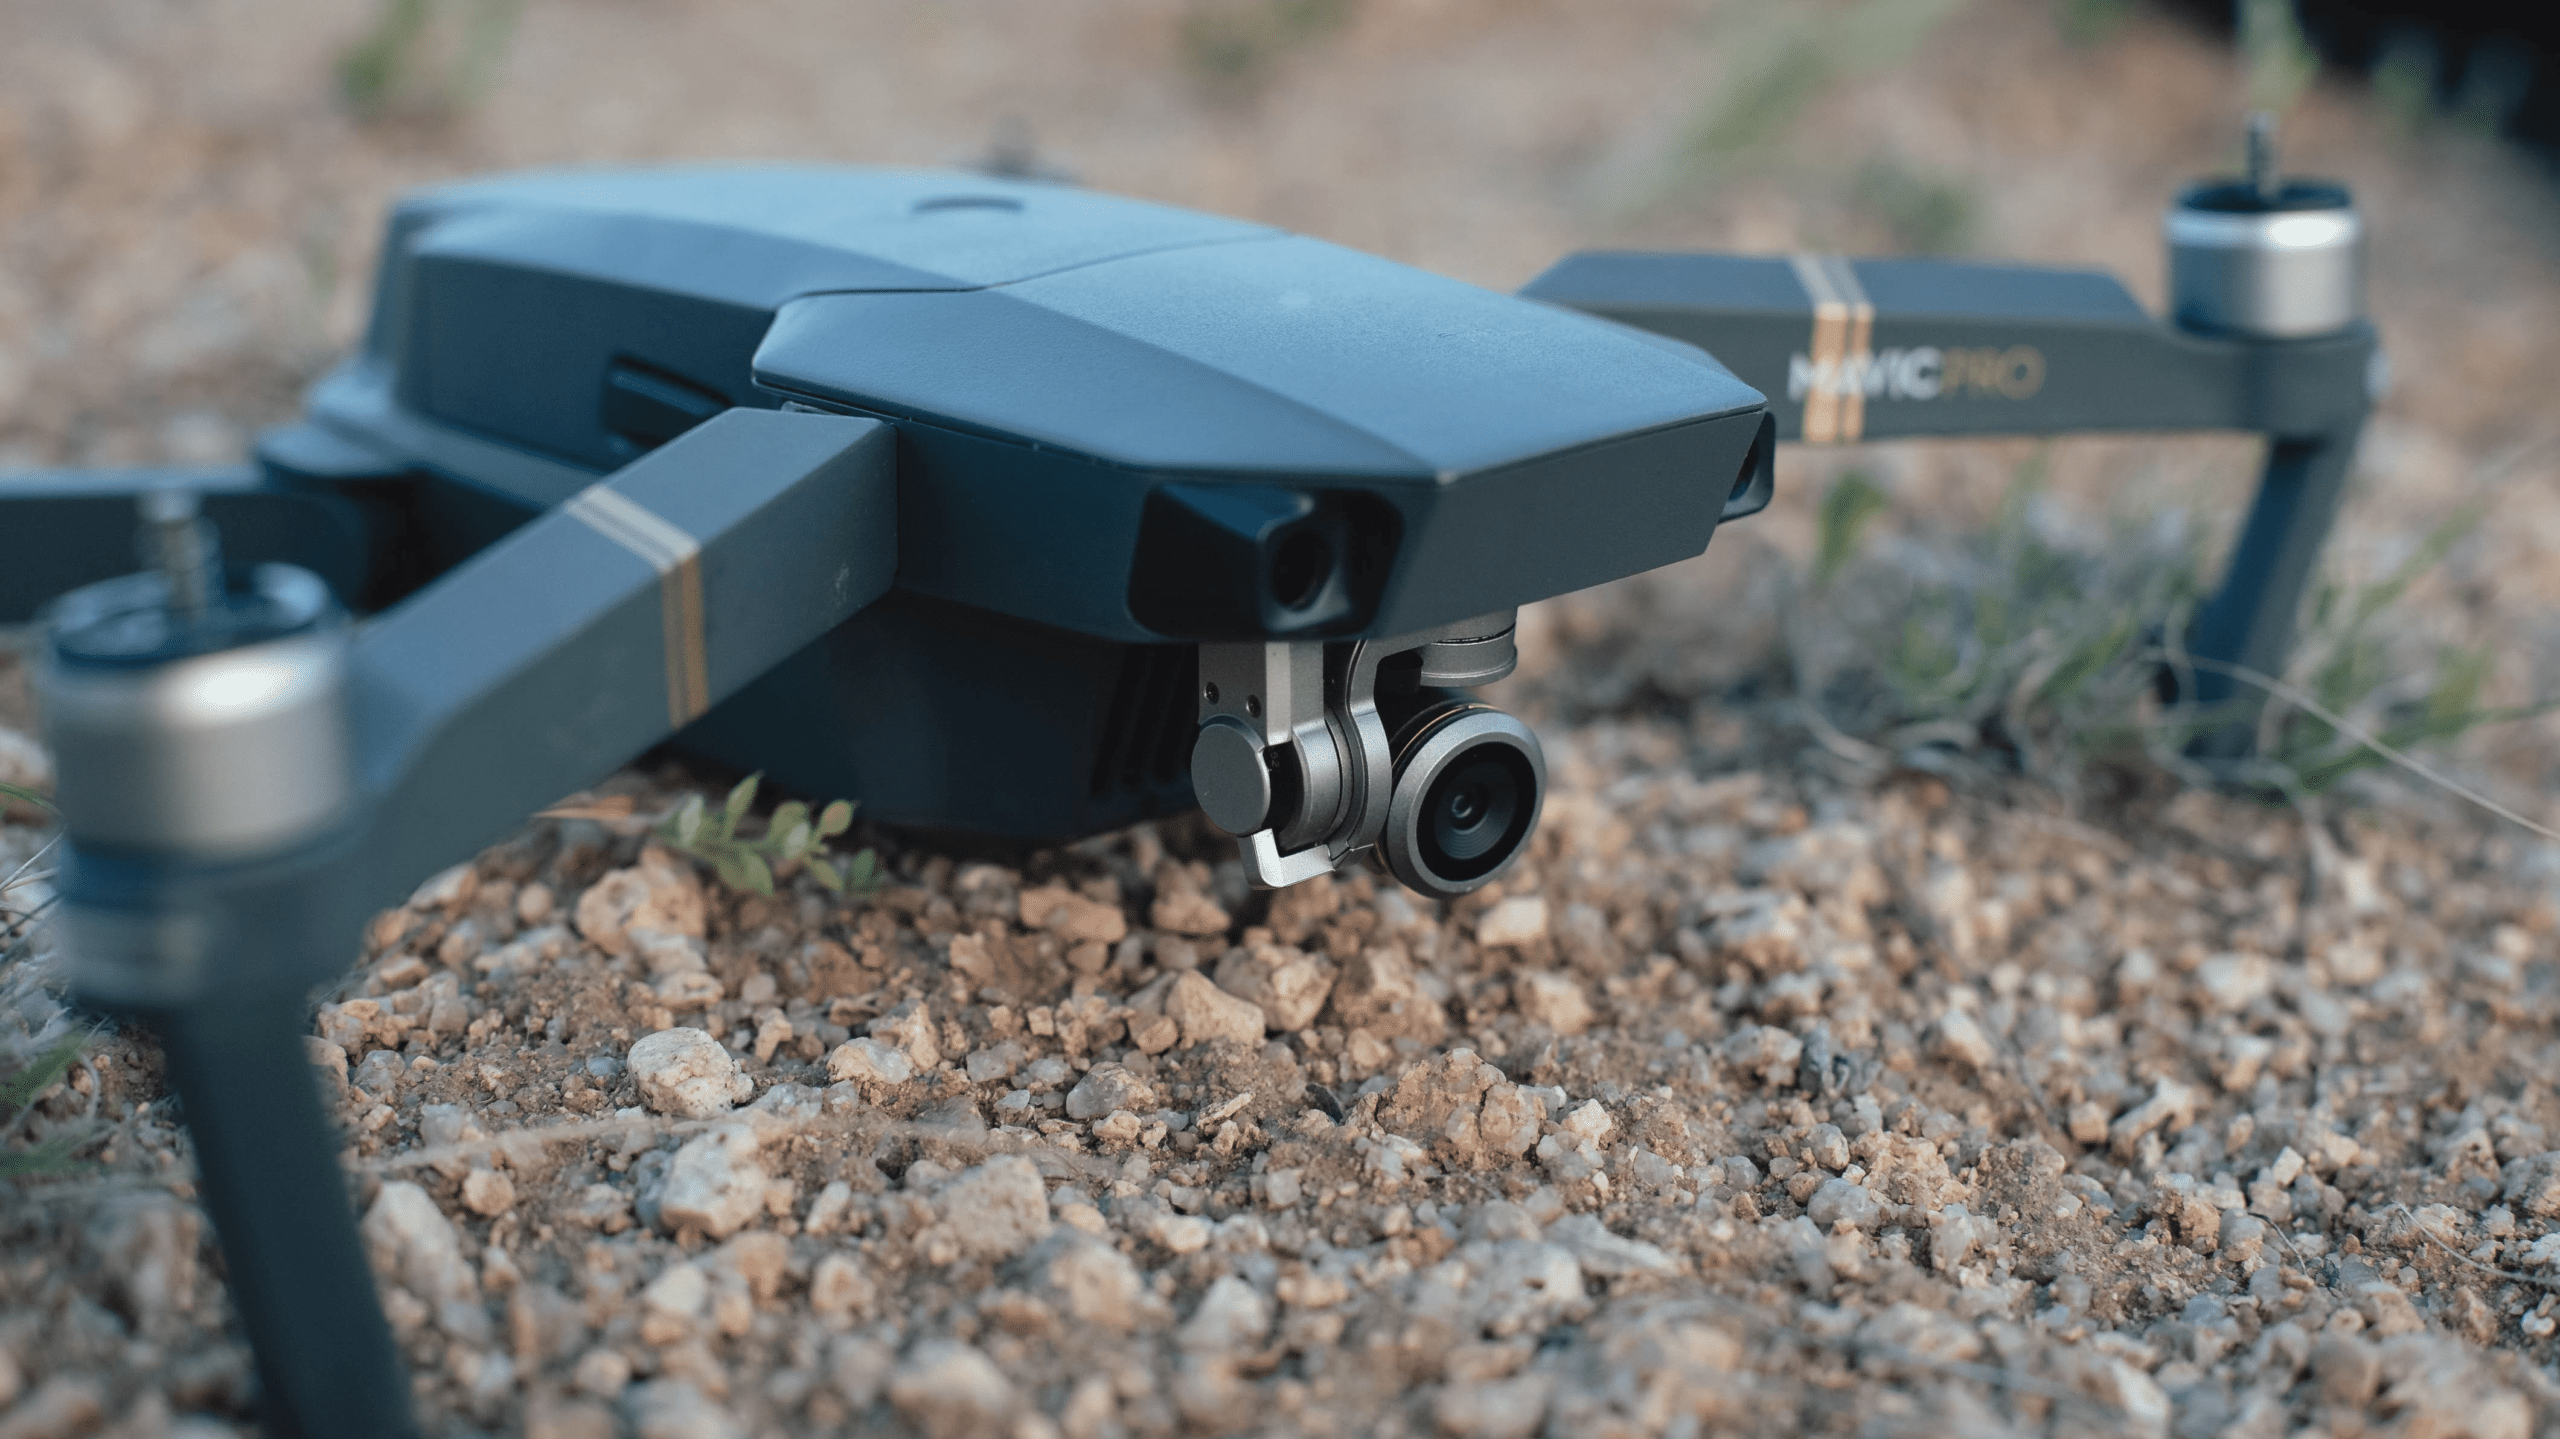 lost drone on ground